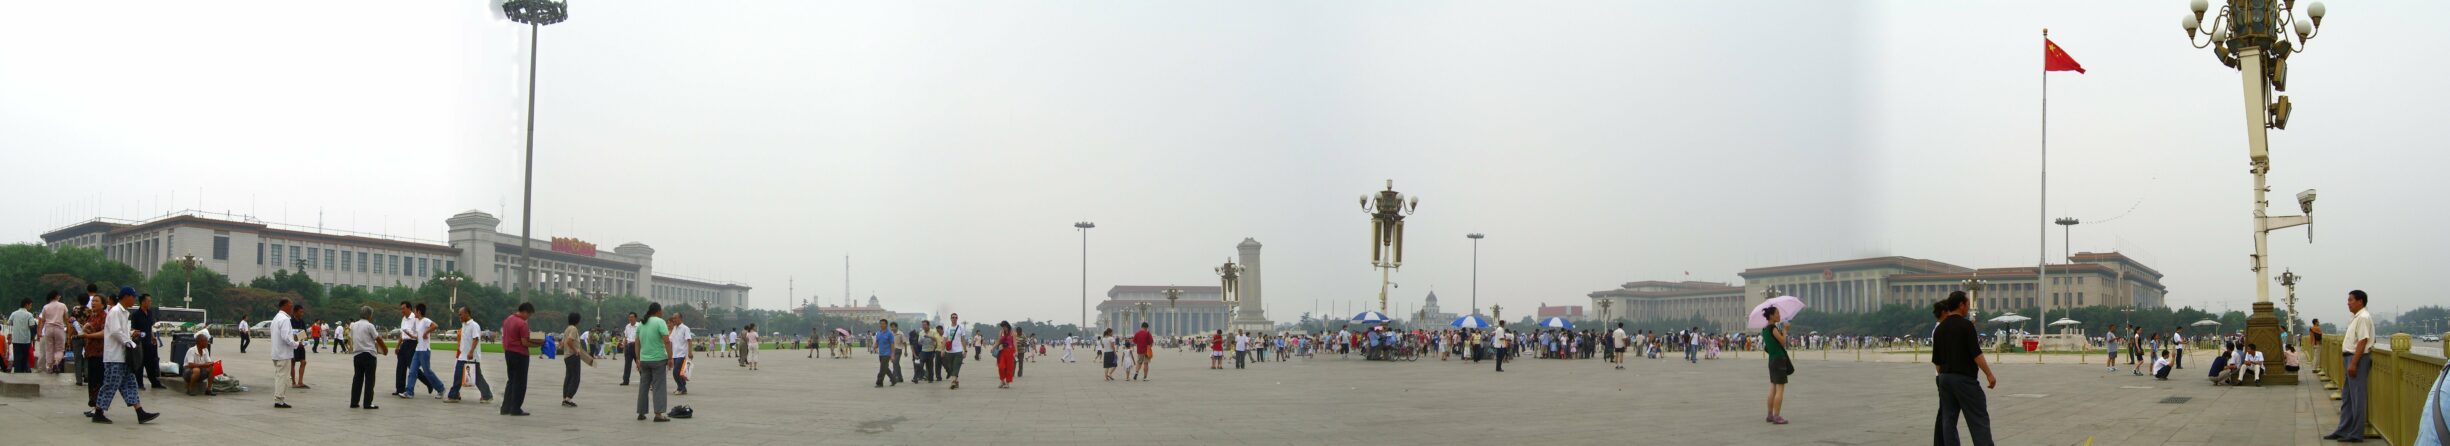 Beijing Tiananmen Square. Photo: Taken on February 22, 2008 by ericwonghk83. (CC BY-NC-ND 2.0).